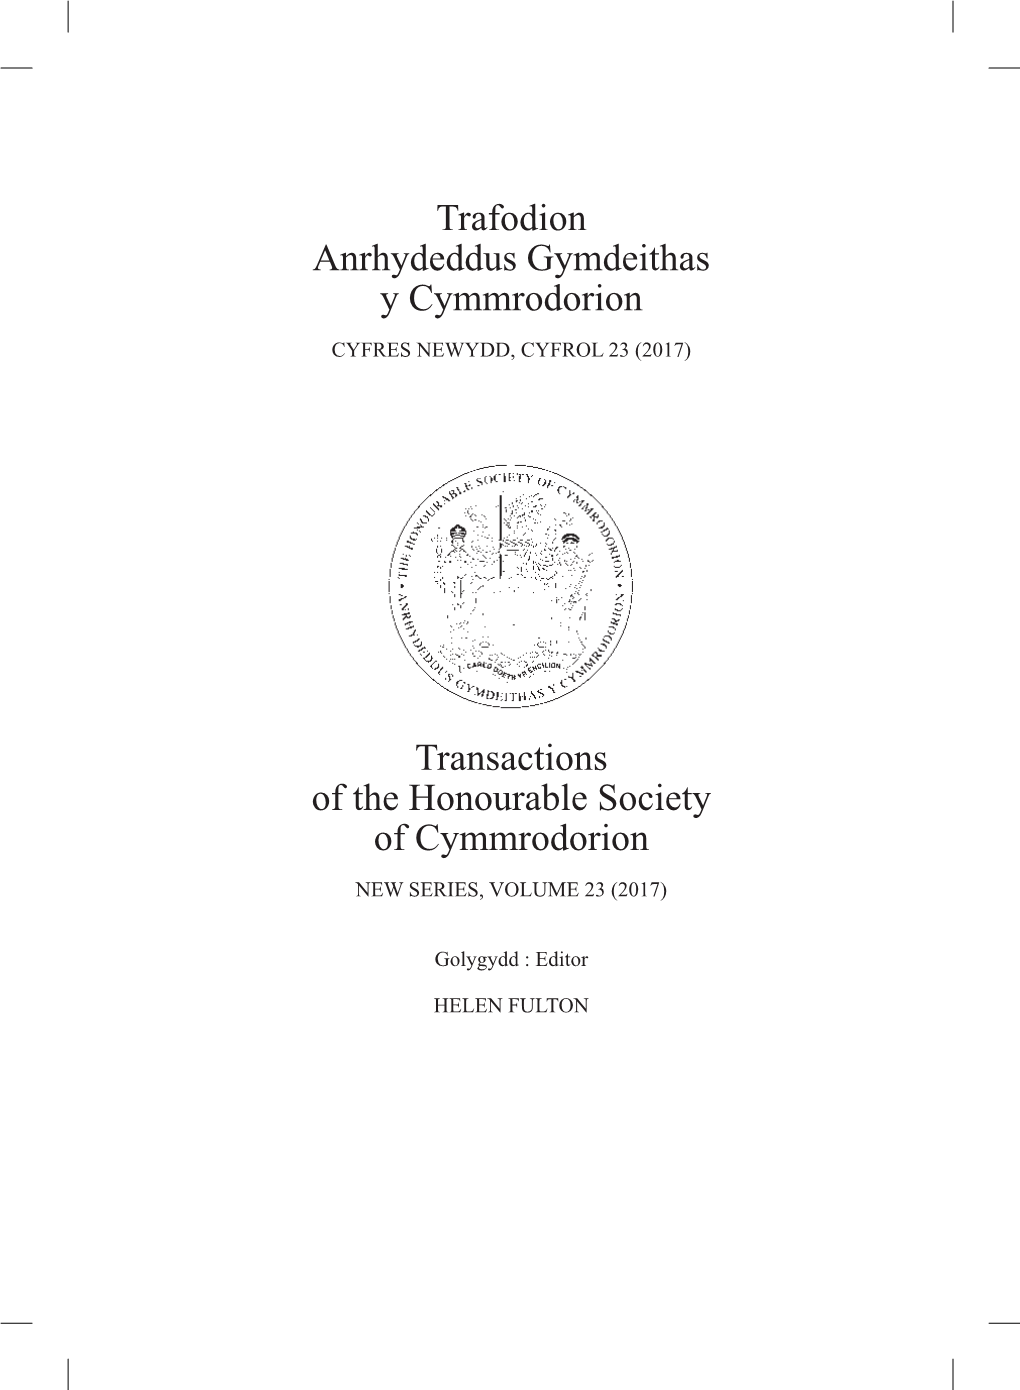 Trafodion Anrhydeddus Gymdeithas Y Cymmrodorion Transactions of the Honourable Society of Cymmrodorion